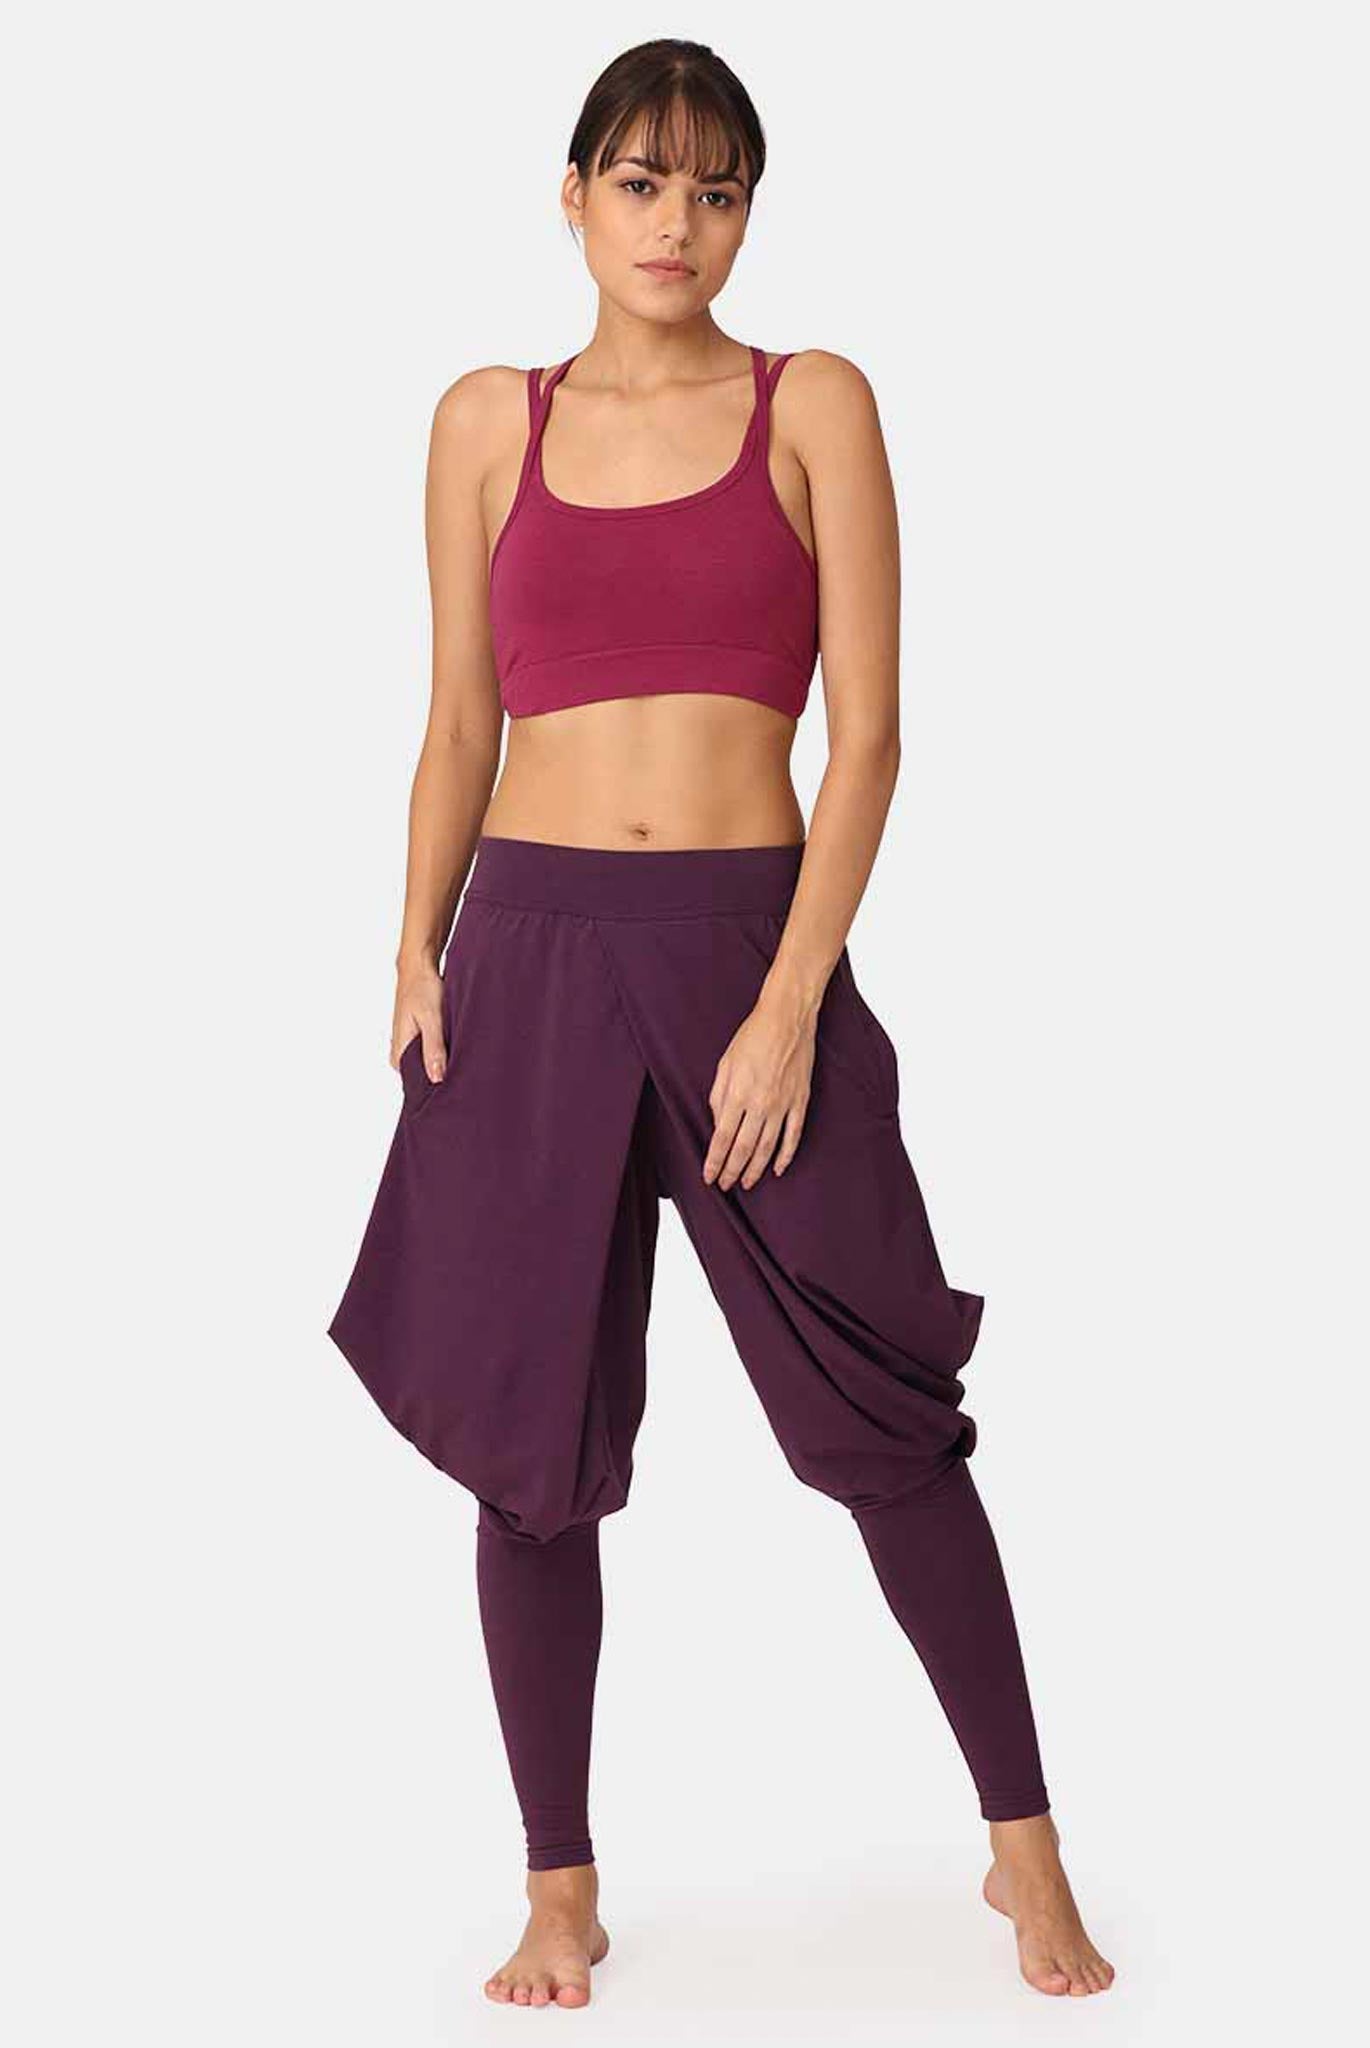 TOLXI Solid Women Dhoti - Buy TOLXI Solid Women Dhoti Online at Best Prices  in India | Flipkart.com